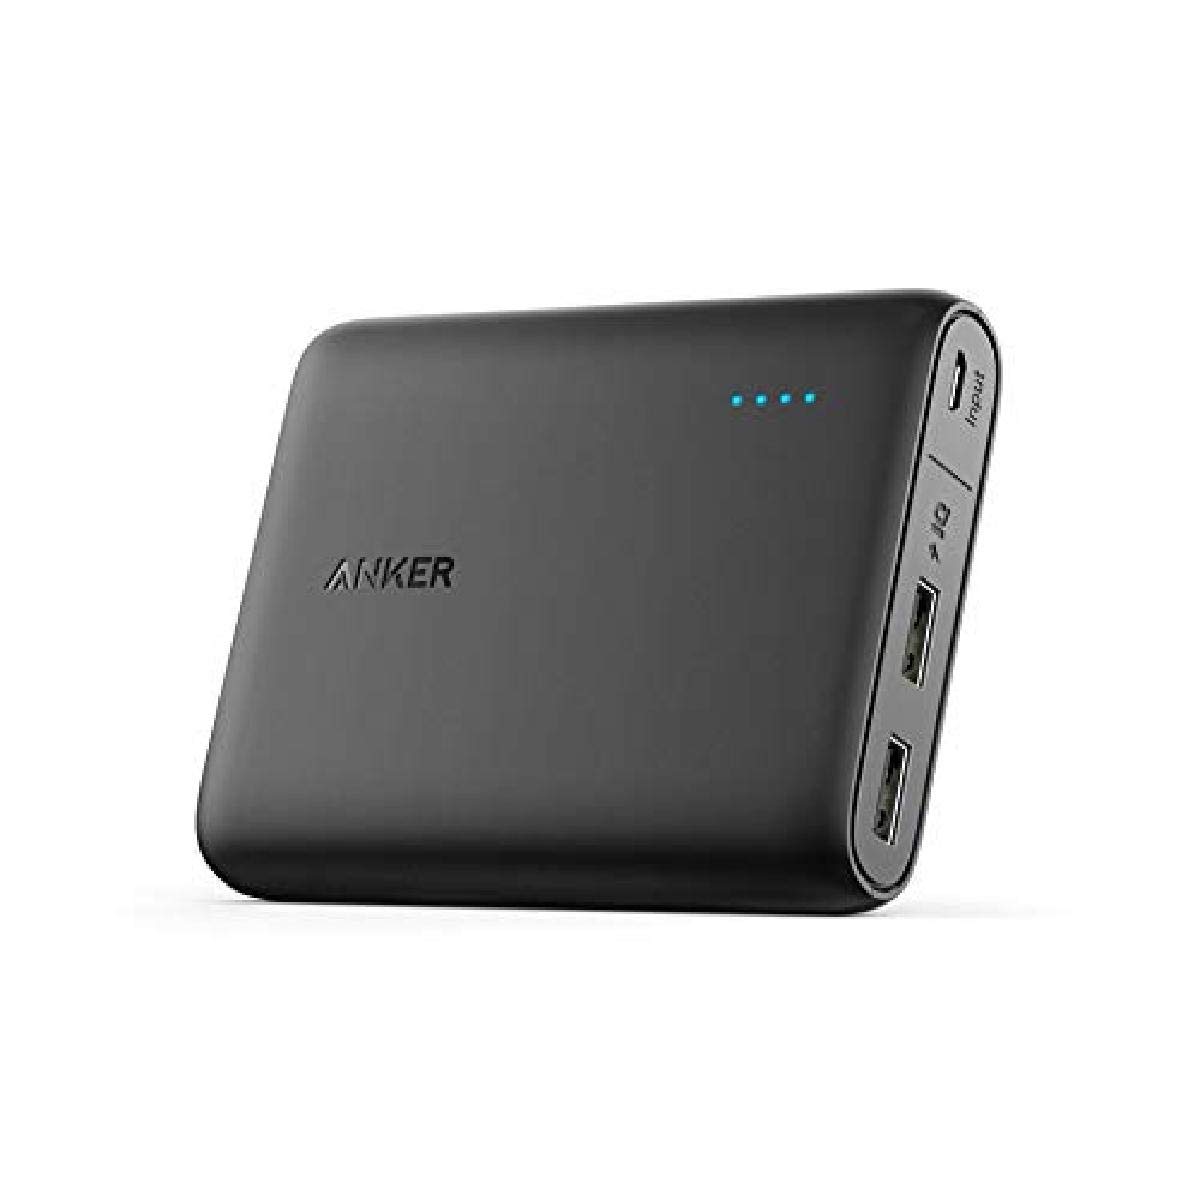 Anker PowerCore 10400 Portable Charger with PowerIQ for iPhone, iPad, Samsung Galaxy and More (Black)